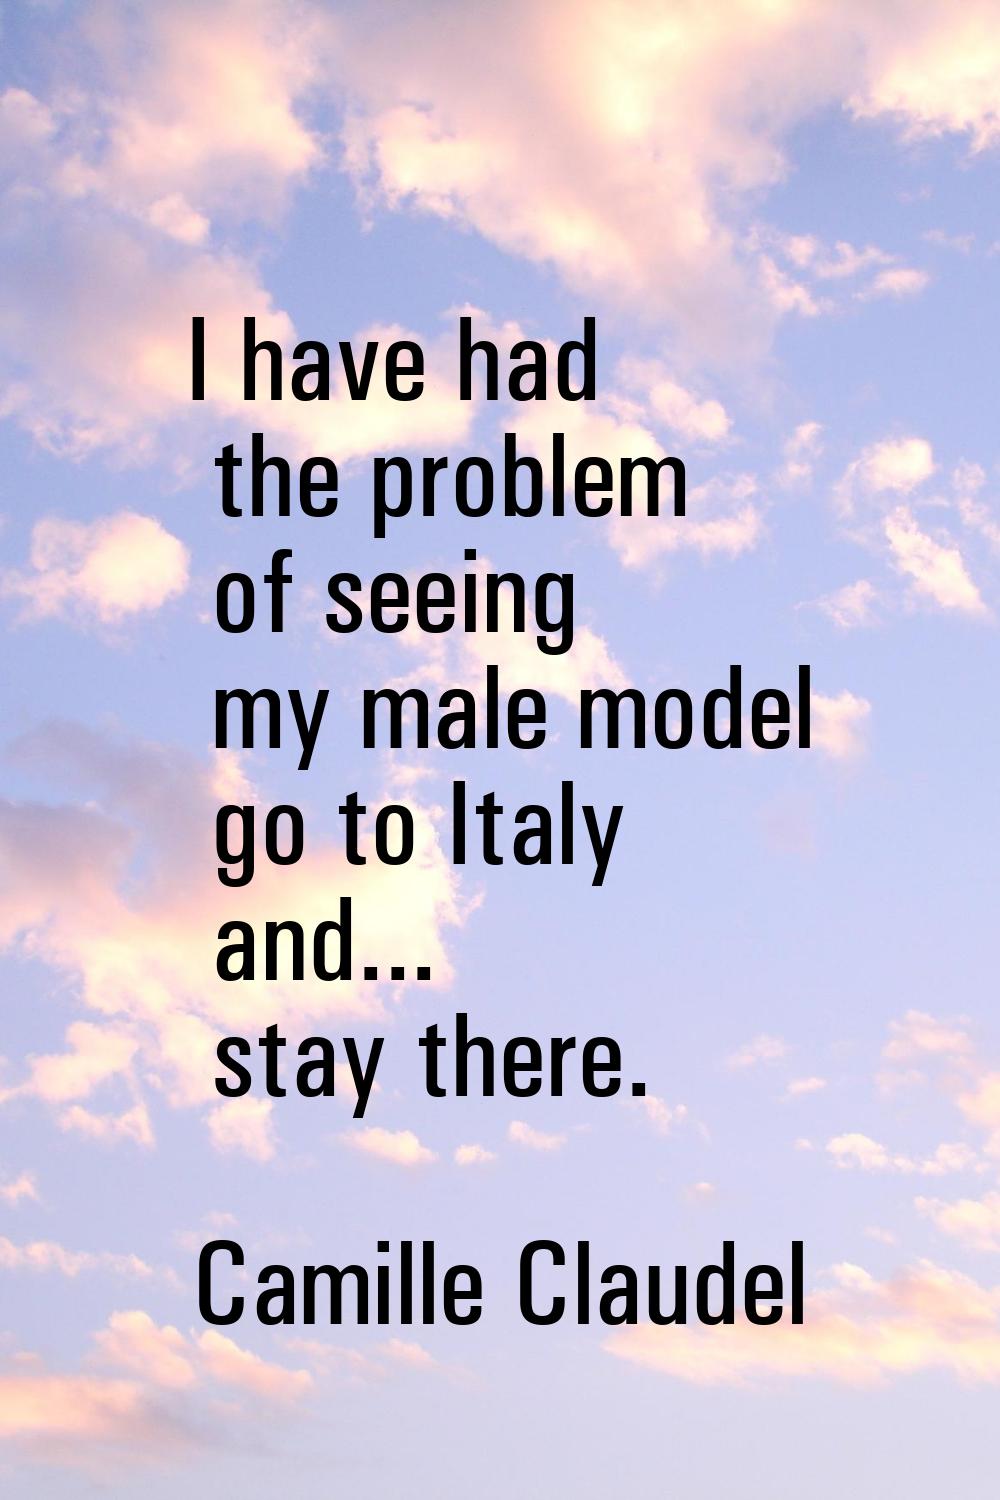 I have had the problem of seeing my male model go to Italy and... stay there.